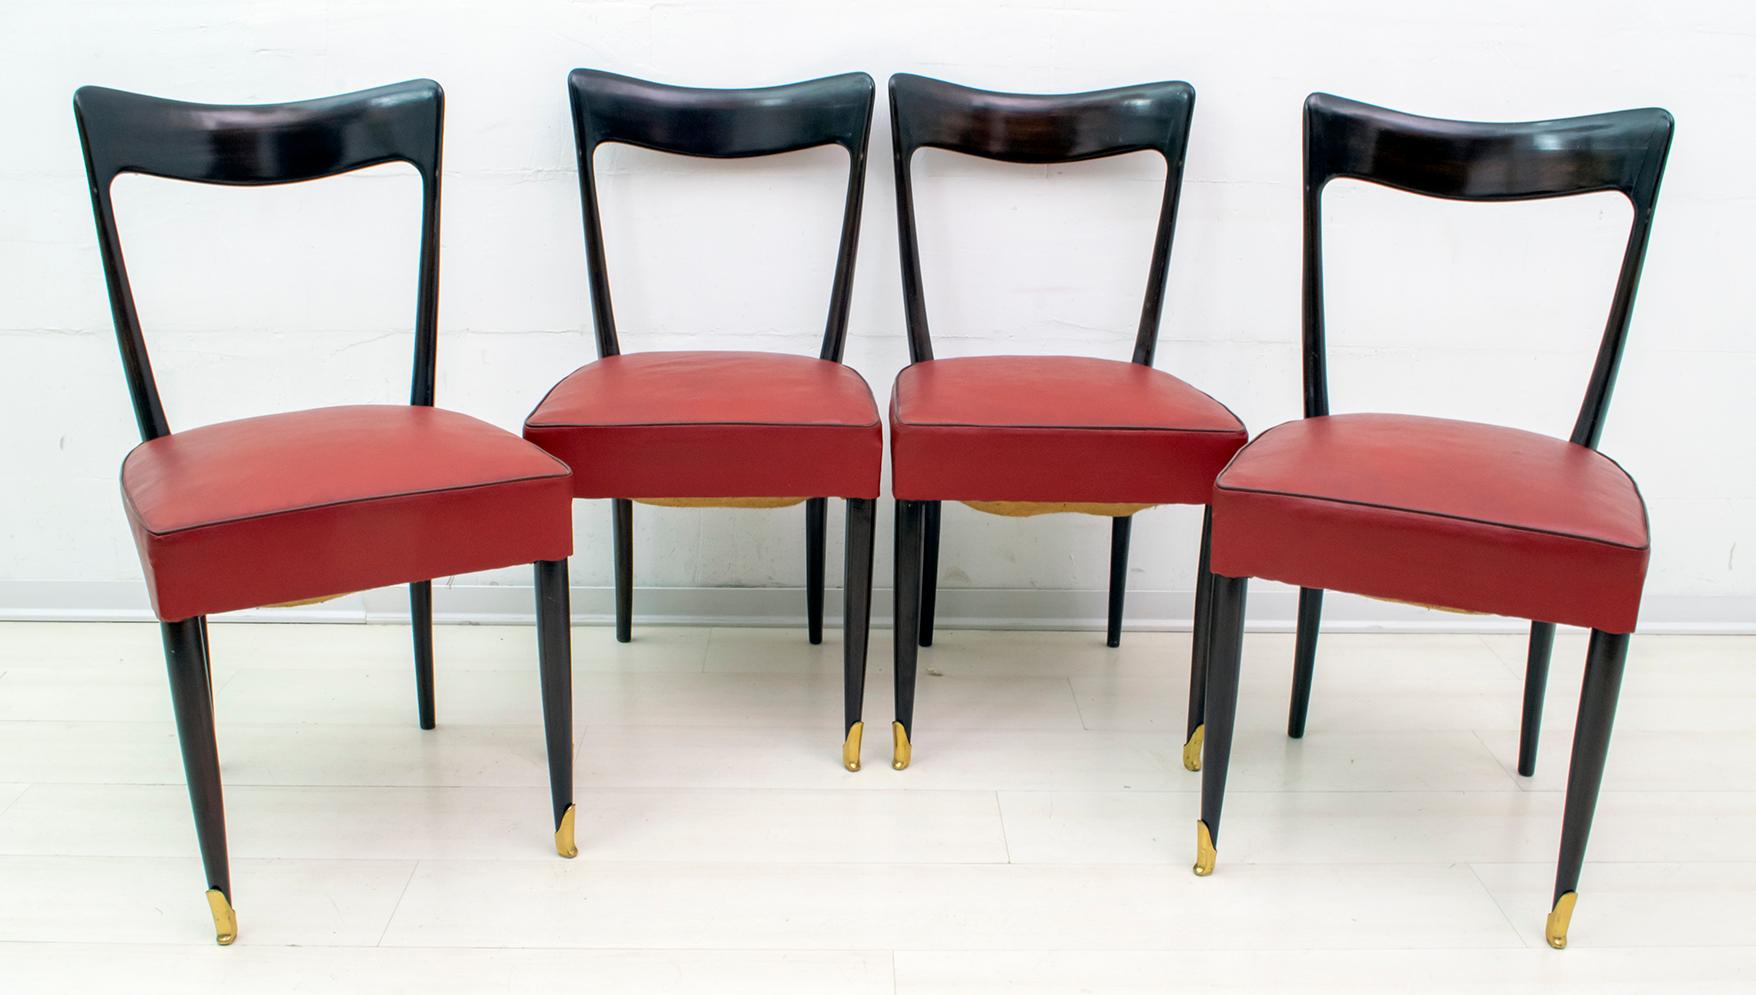 Faux Leather Guglielmo Ulrich Mid-Century Modern Italian Mahogany Eight Dining Chairs, 1940s